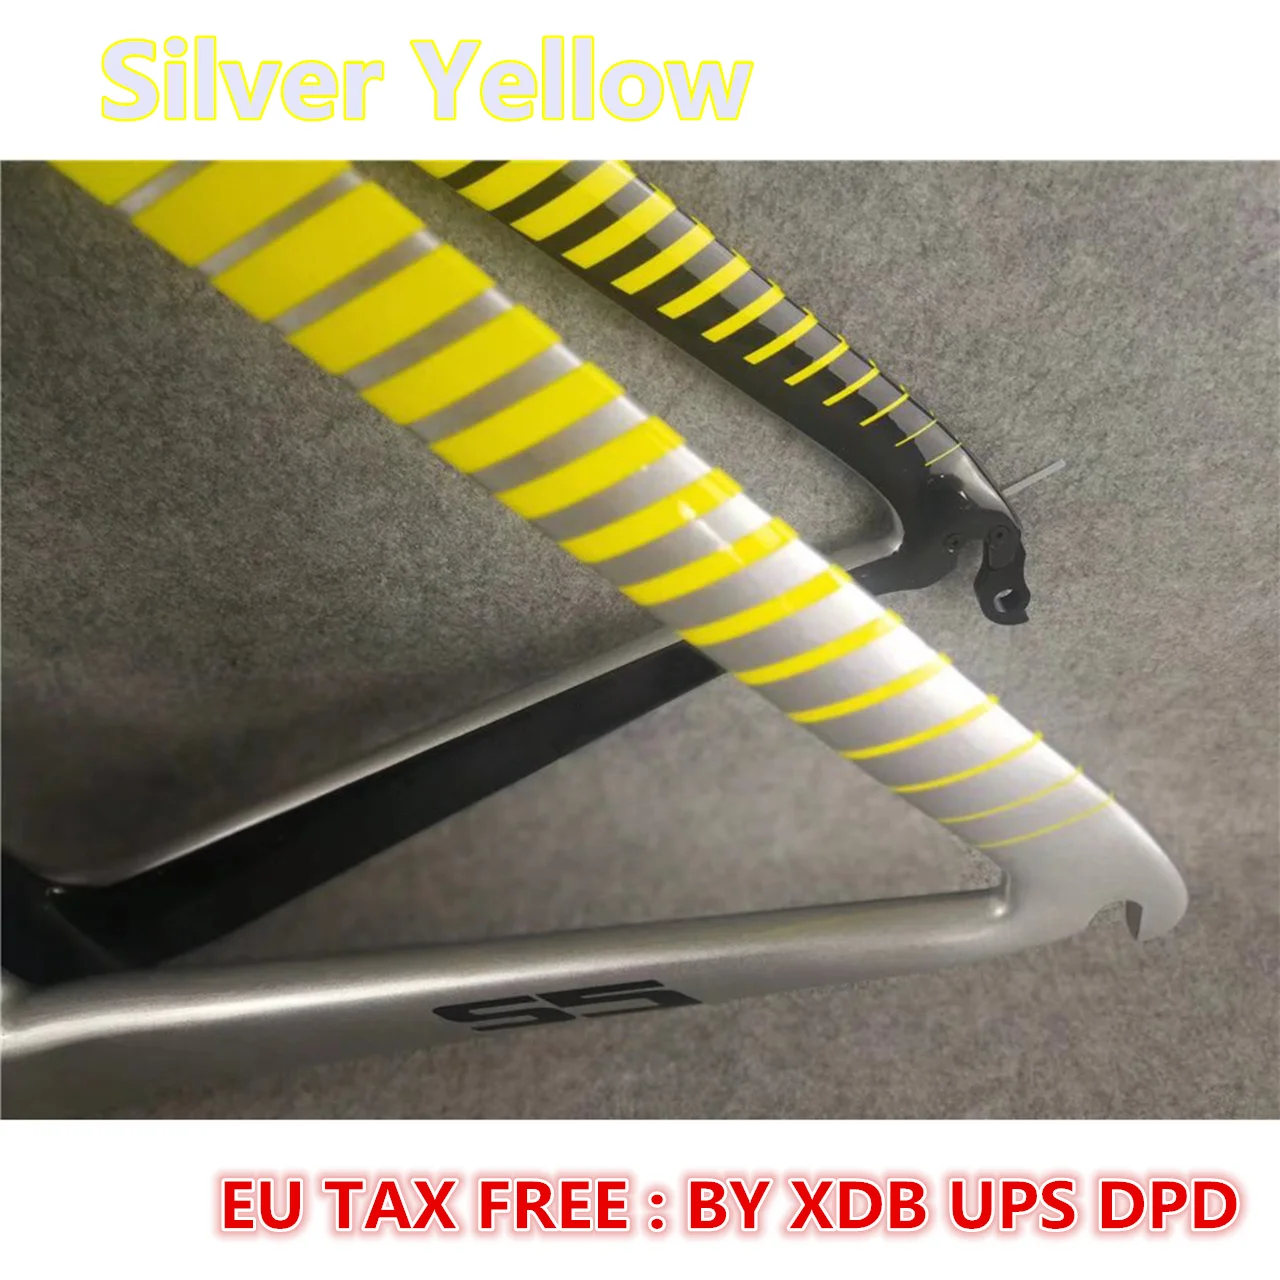 

Yellow Silver S5 Carbon Bike Road Frames T1000 UD Bicycle Frameset With 48 51 54 56 58cm XDB DPD UPS Shipment for EU